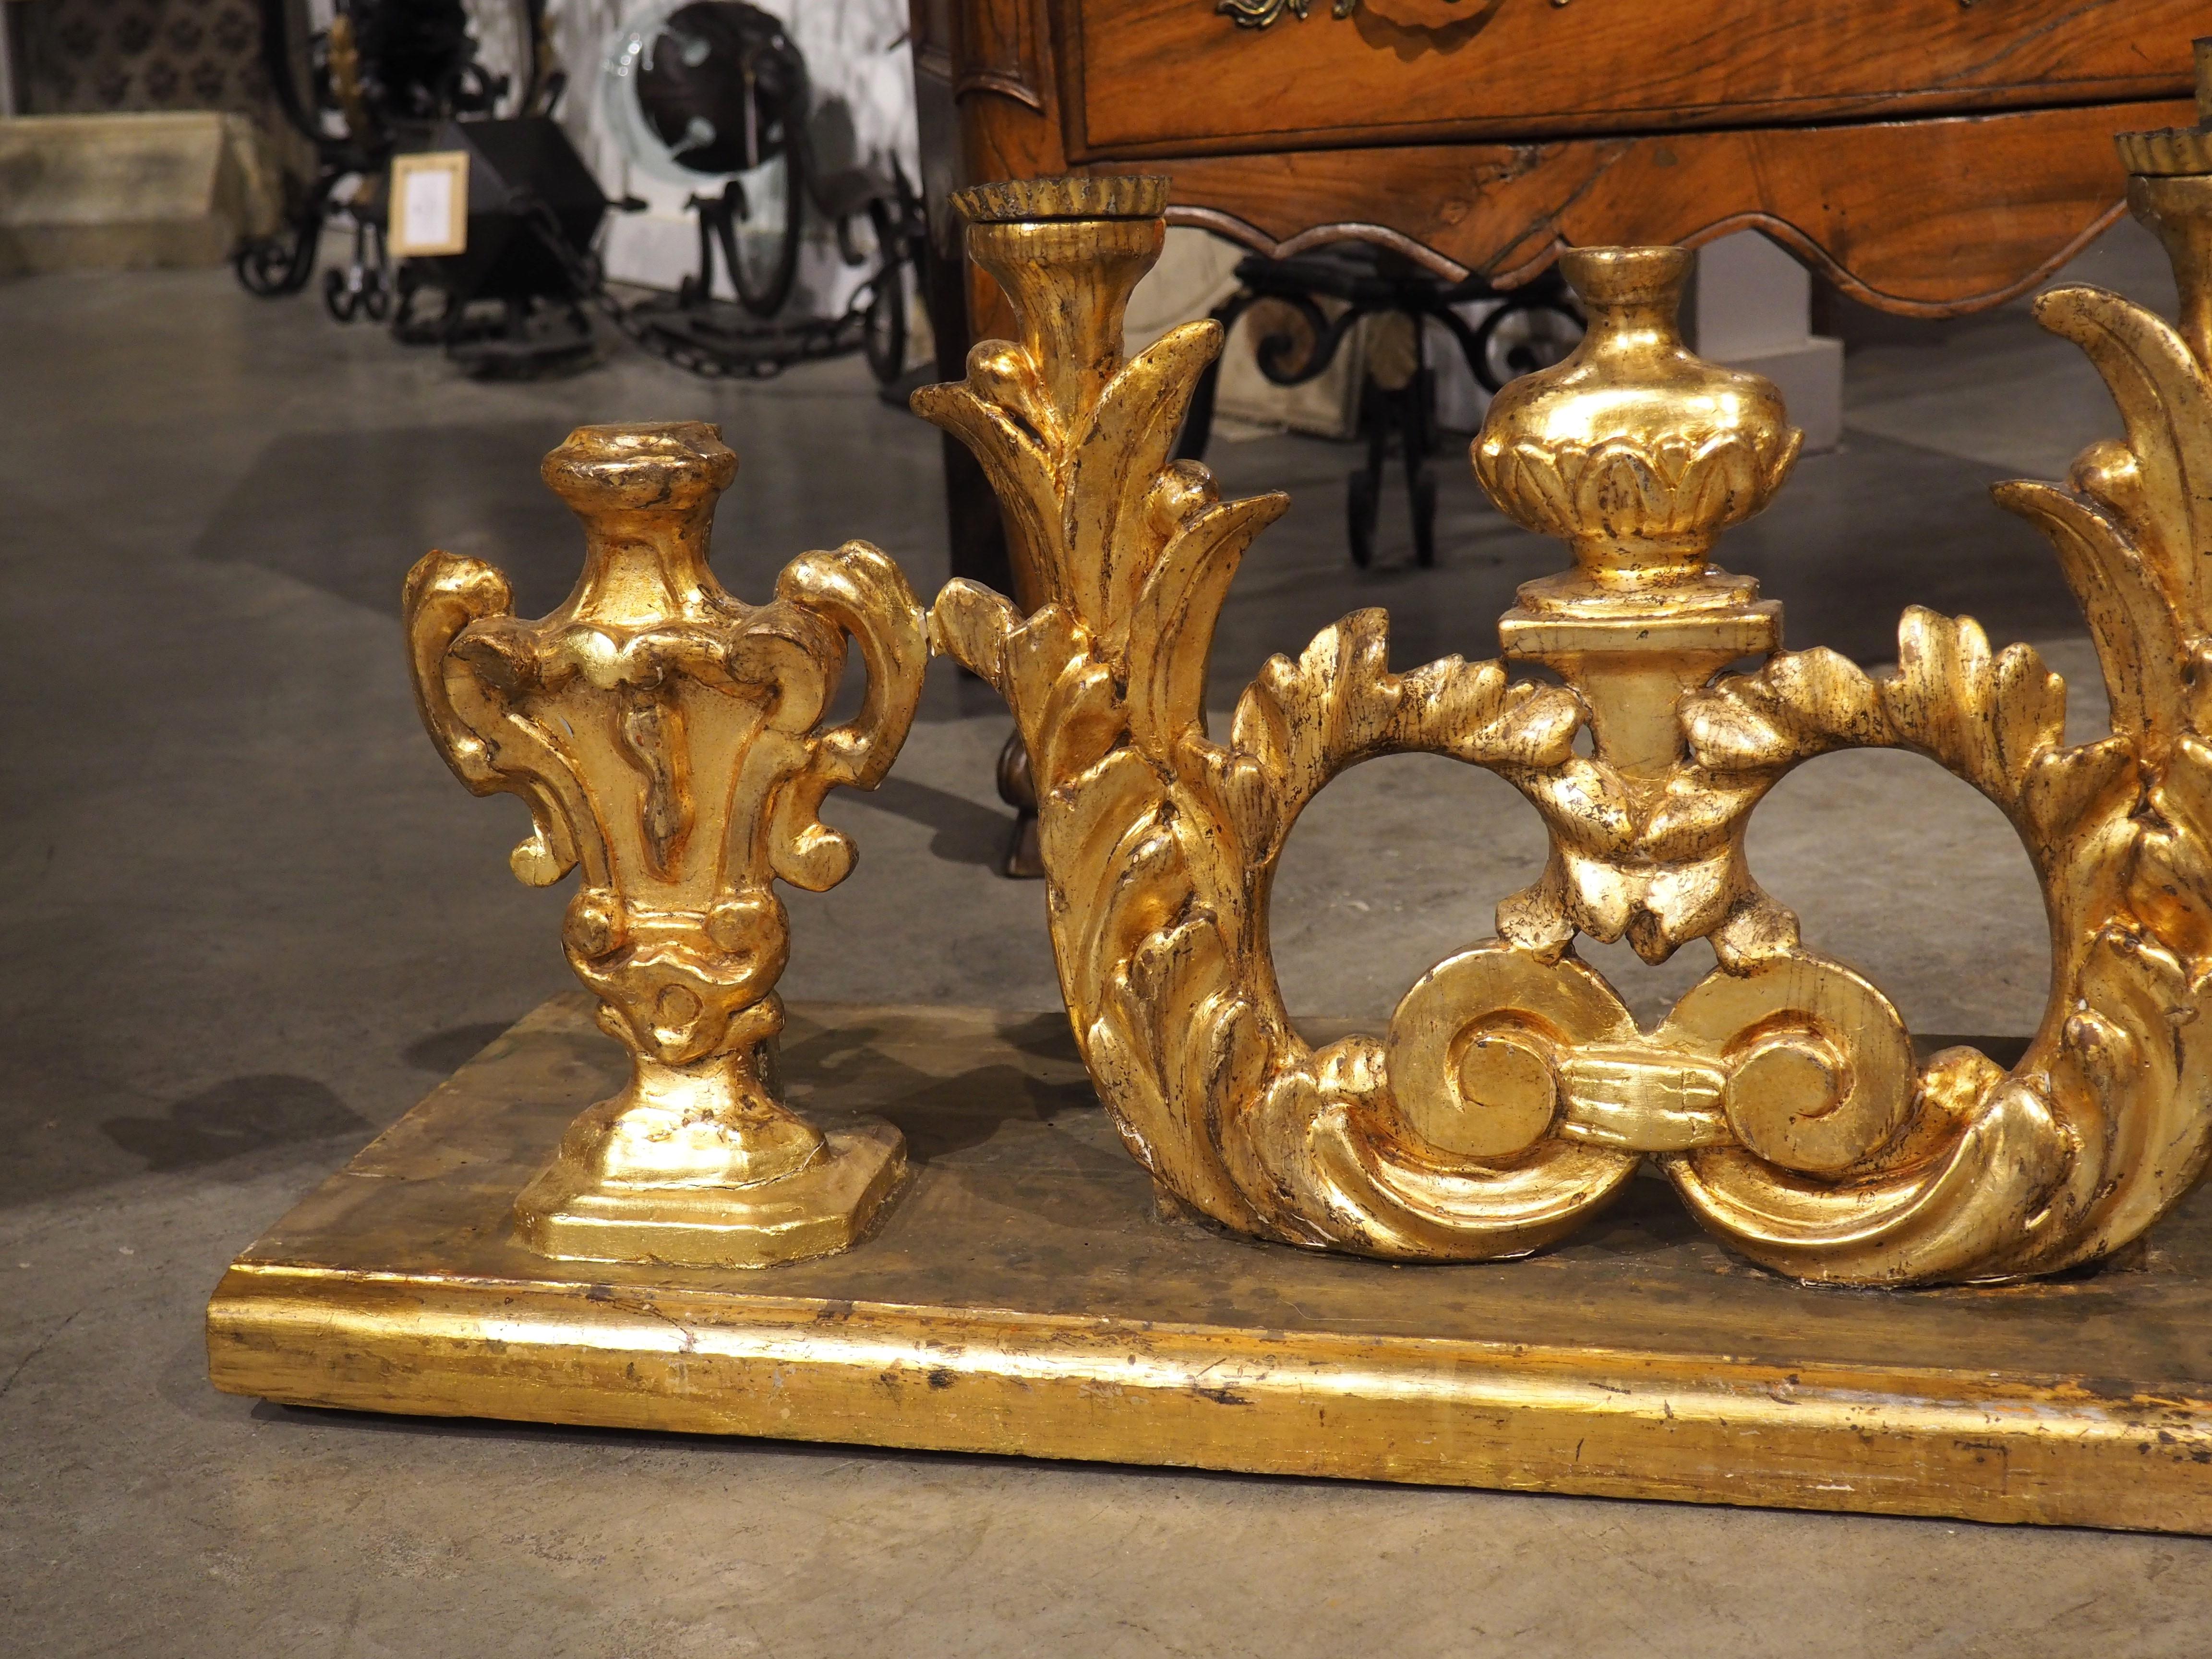 Hand-Carved Circa 1750 Carved and Gilded Altar Candelabra from Tuscany, Italy 73 inches Long For Sale